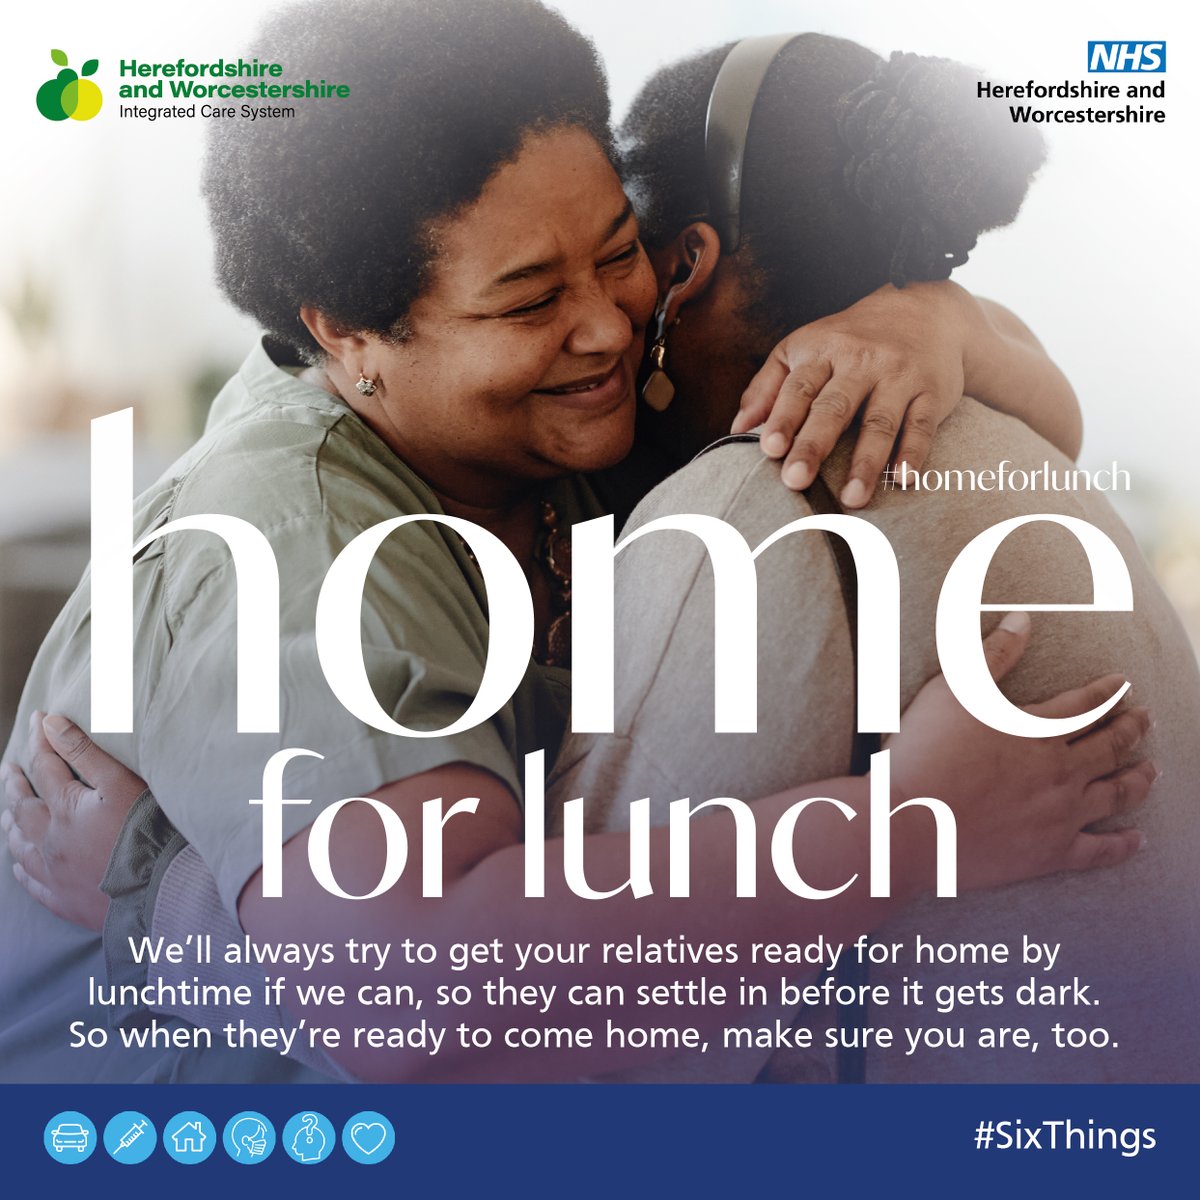 Staying in a hospital bed longer than needed can have a negative impact someone's mental and physical wellbeing. Help us get you home sooner by planning your journey in advance, so we can get you #HomeForLunch Read more: hwics.org.uk/our-services/h…